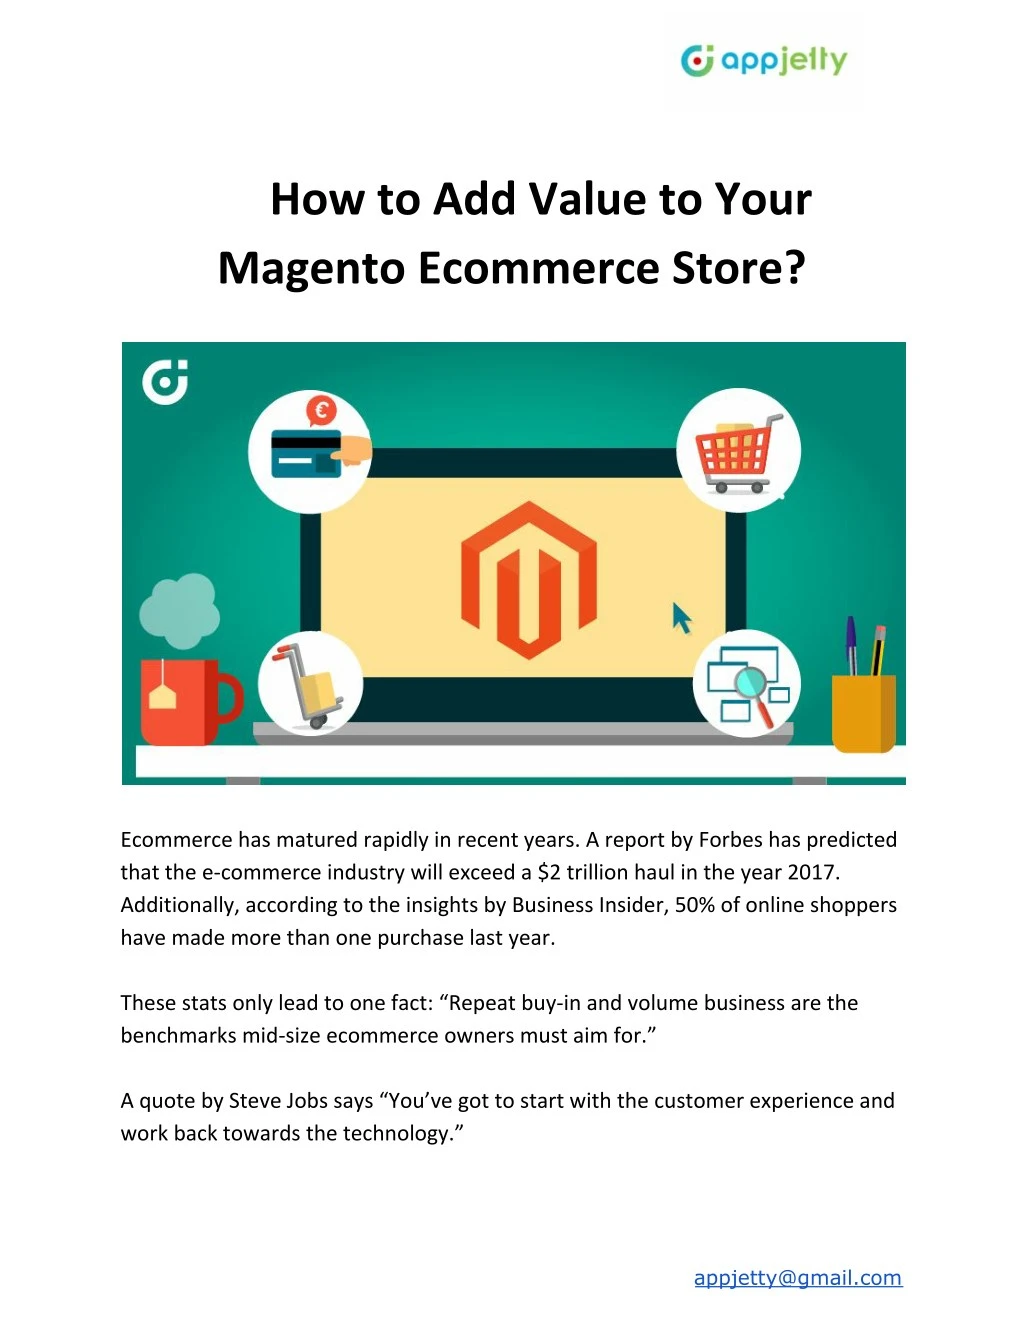 how to add value to your magento ecommerce store